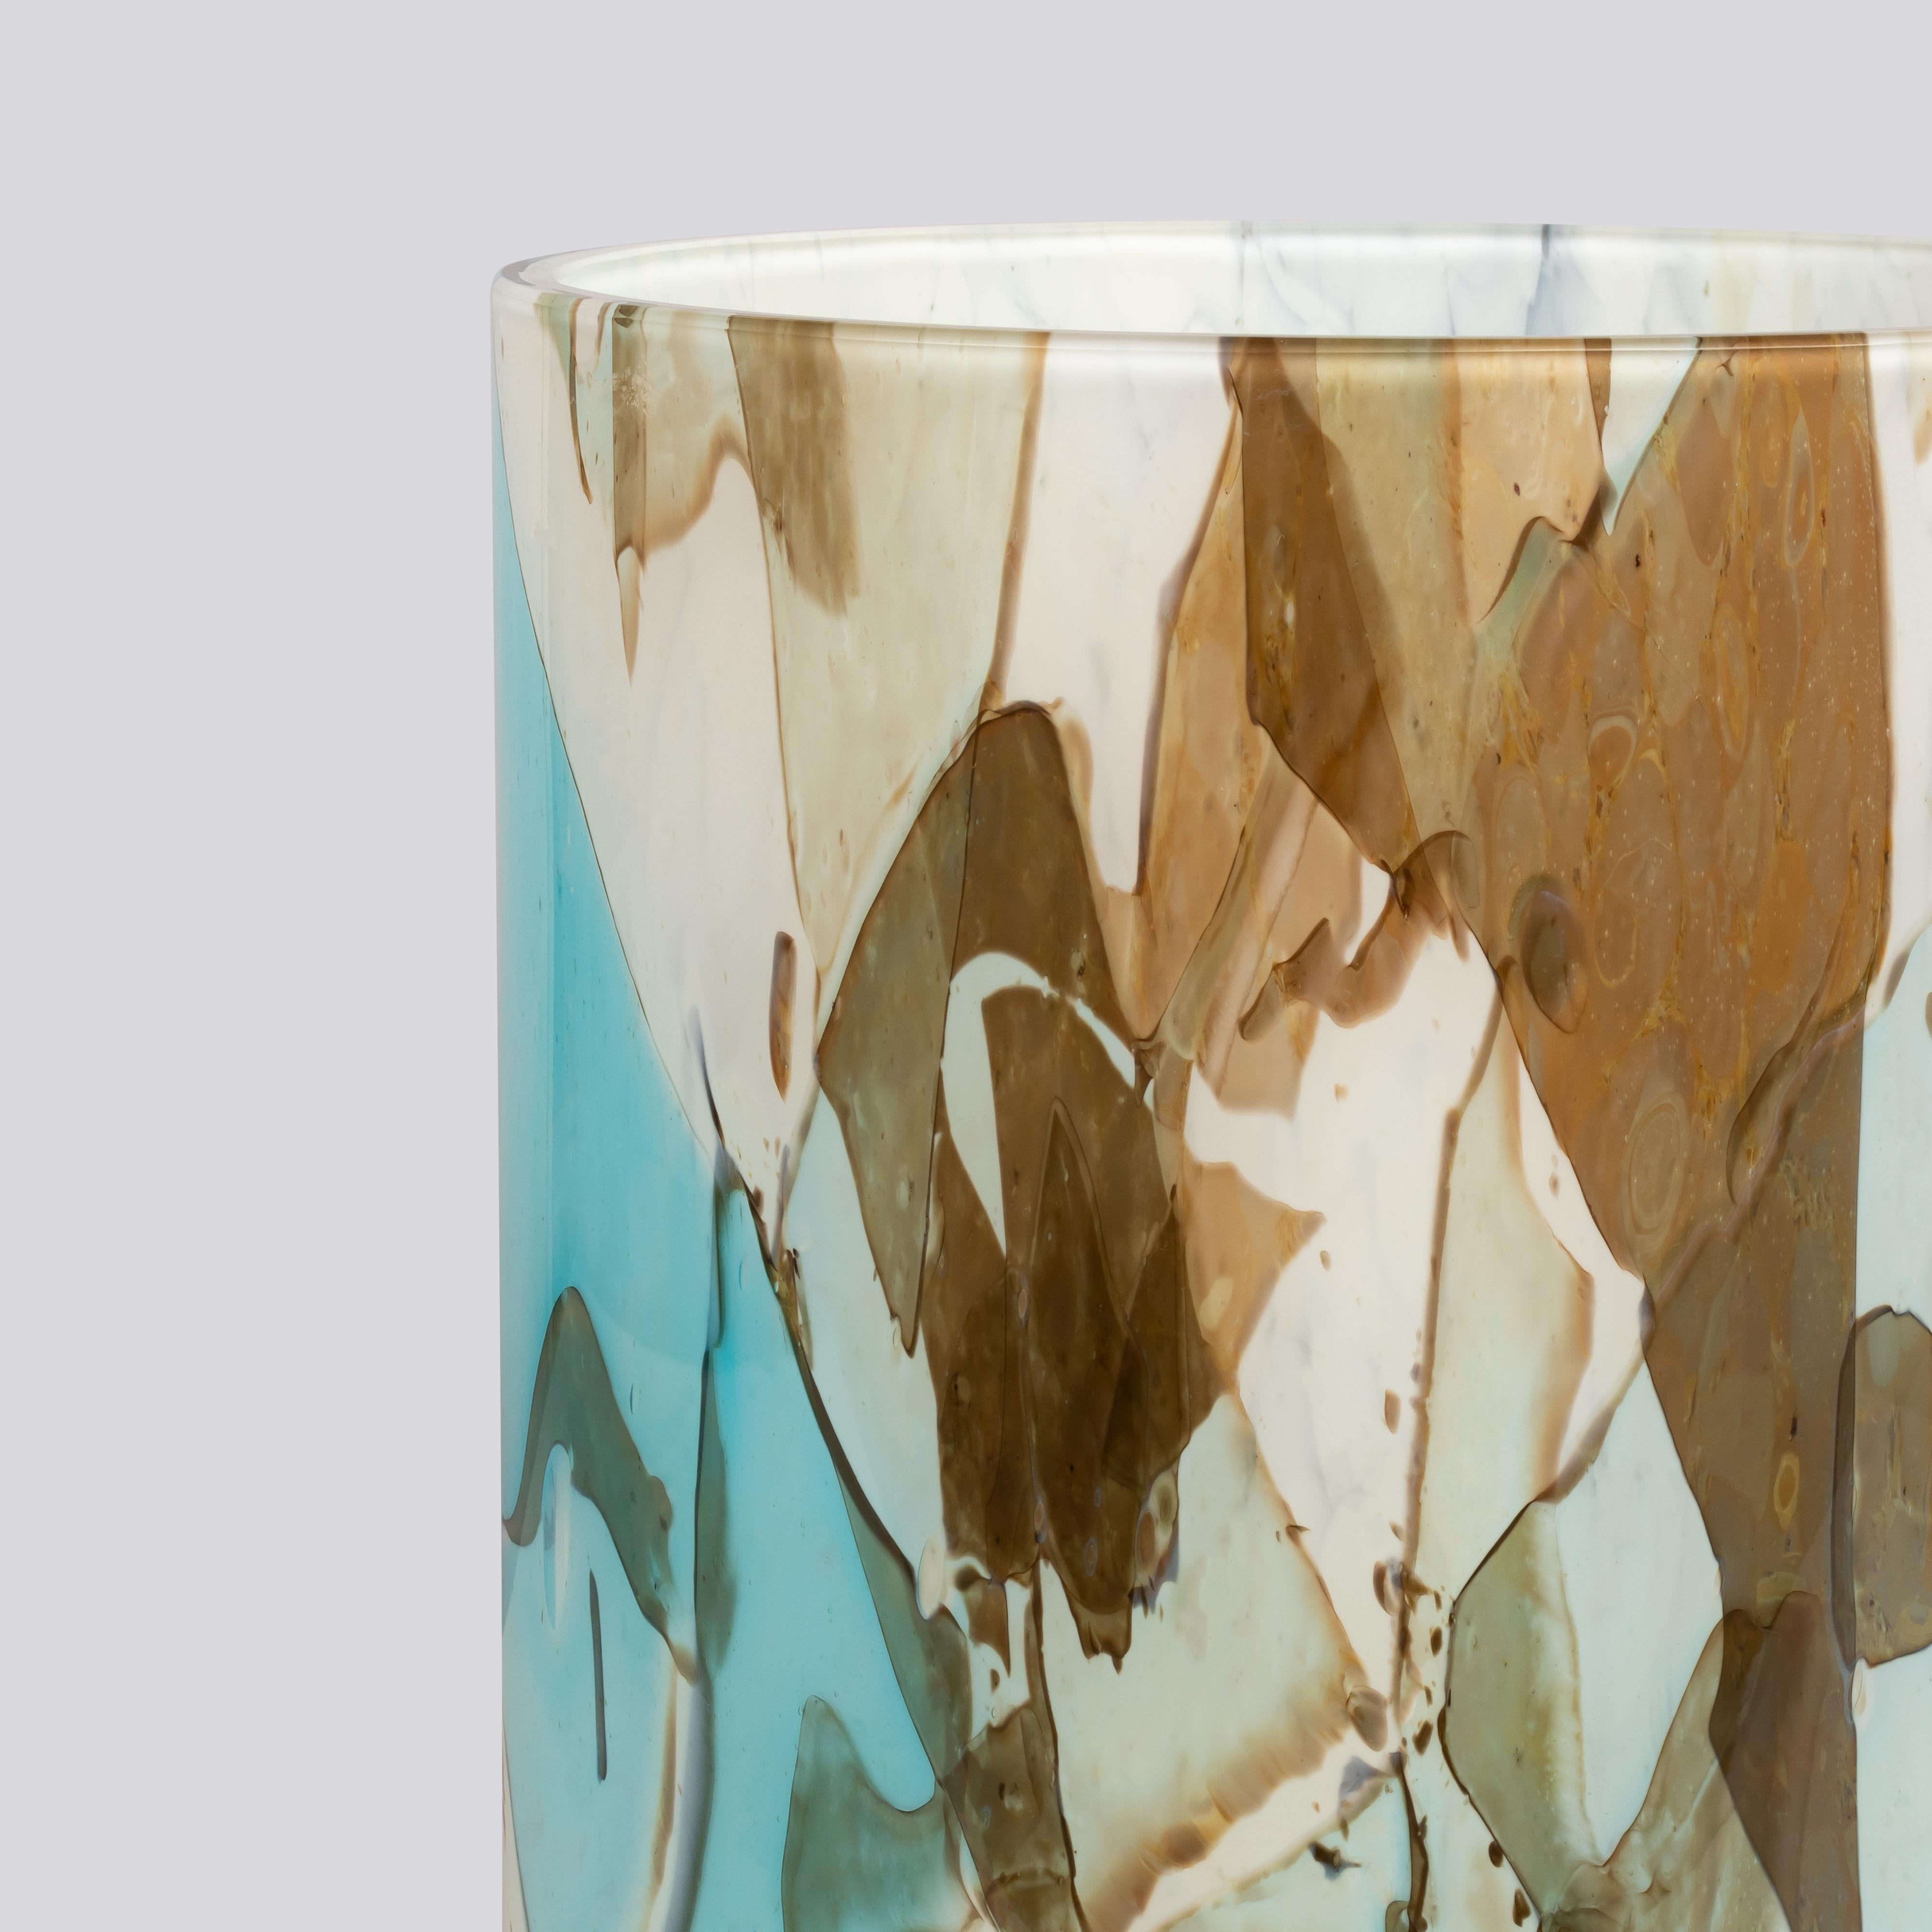 Stories of Italy Large Vase in Murano blown glass is expertly crafted in Venice using our distinctive Nougat technique. This exceptional vase features a captivating fusion of ever-changing hues created by delicately melting colored glass shards onto